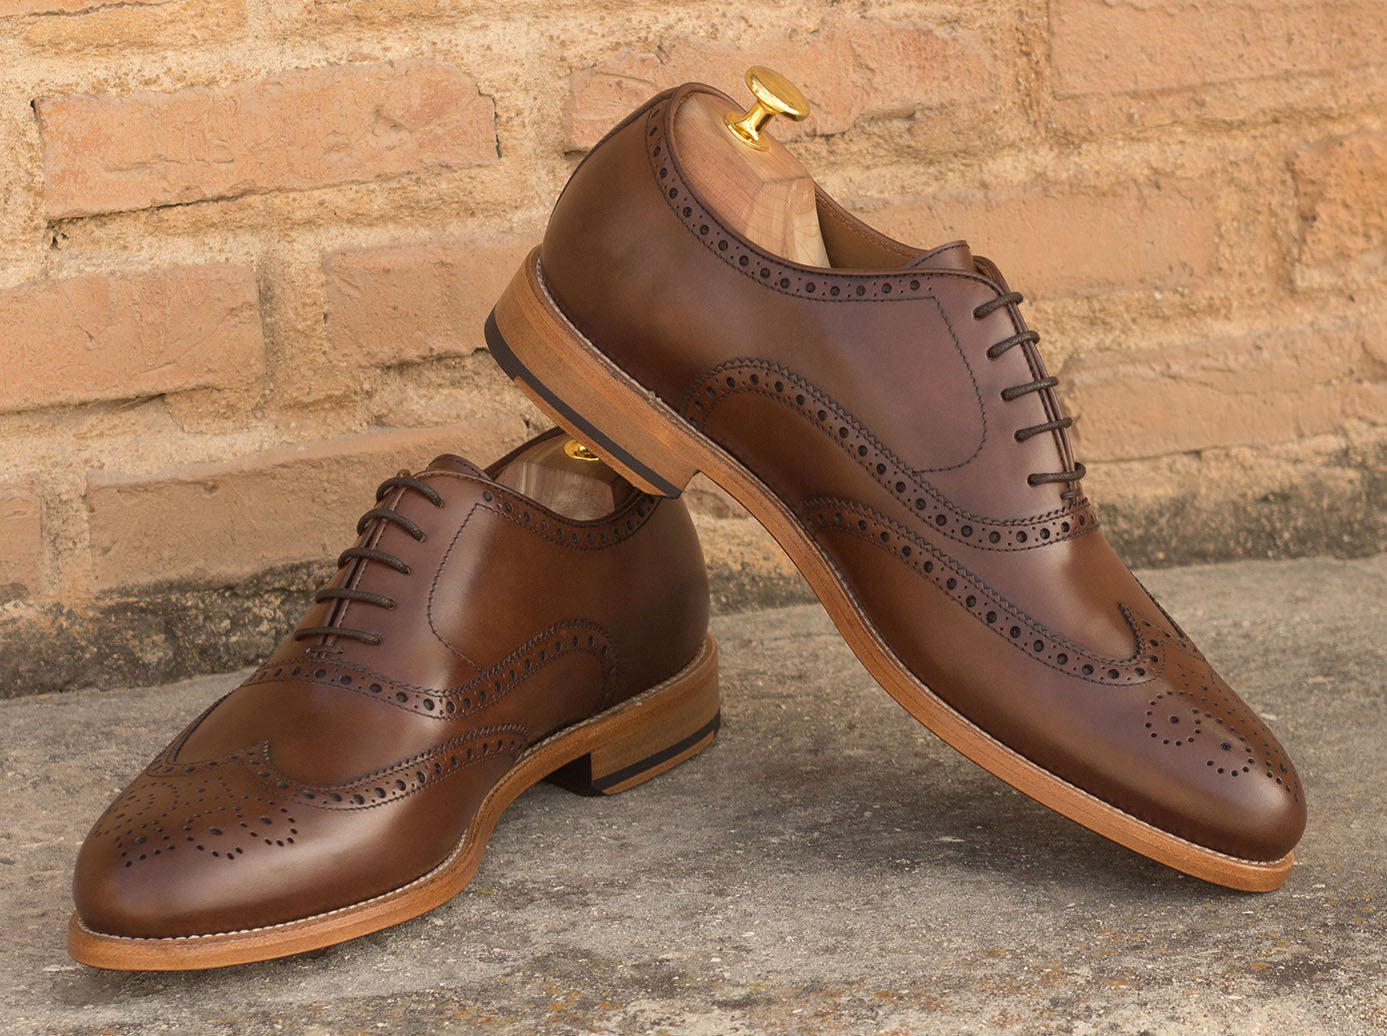 Dark Brown Leather Formal Oxford Wingtip Brogue Lace Up Shoes for Men with Leather Sole. Goodyear Welted Construction Available.